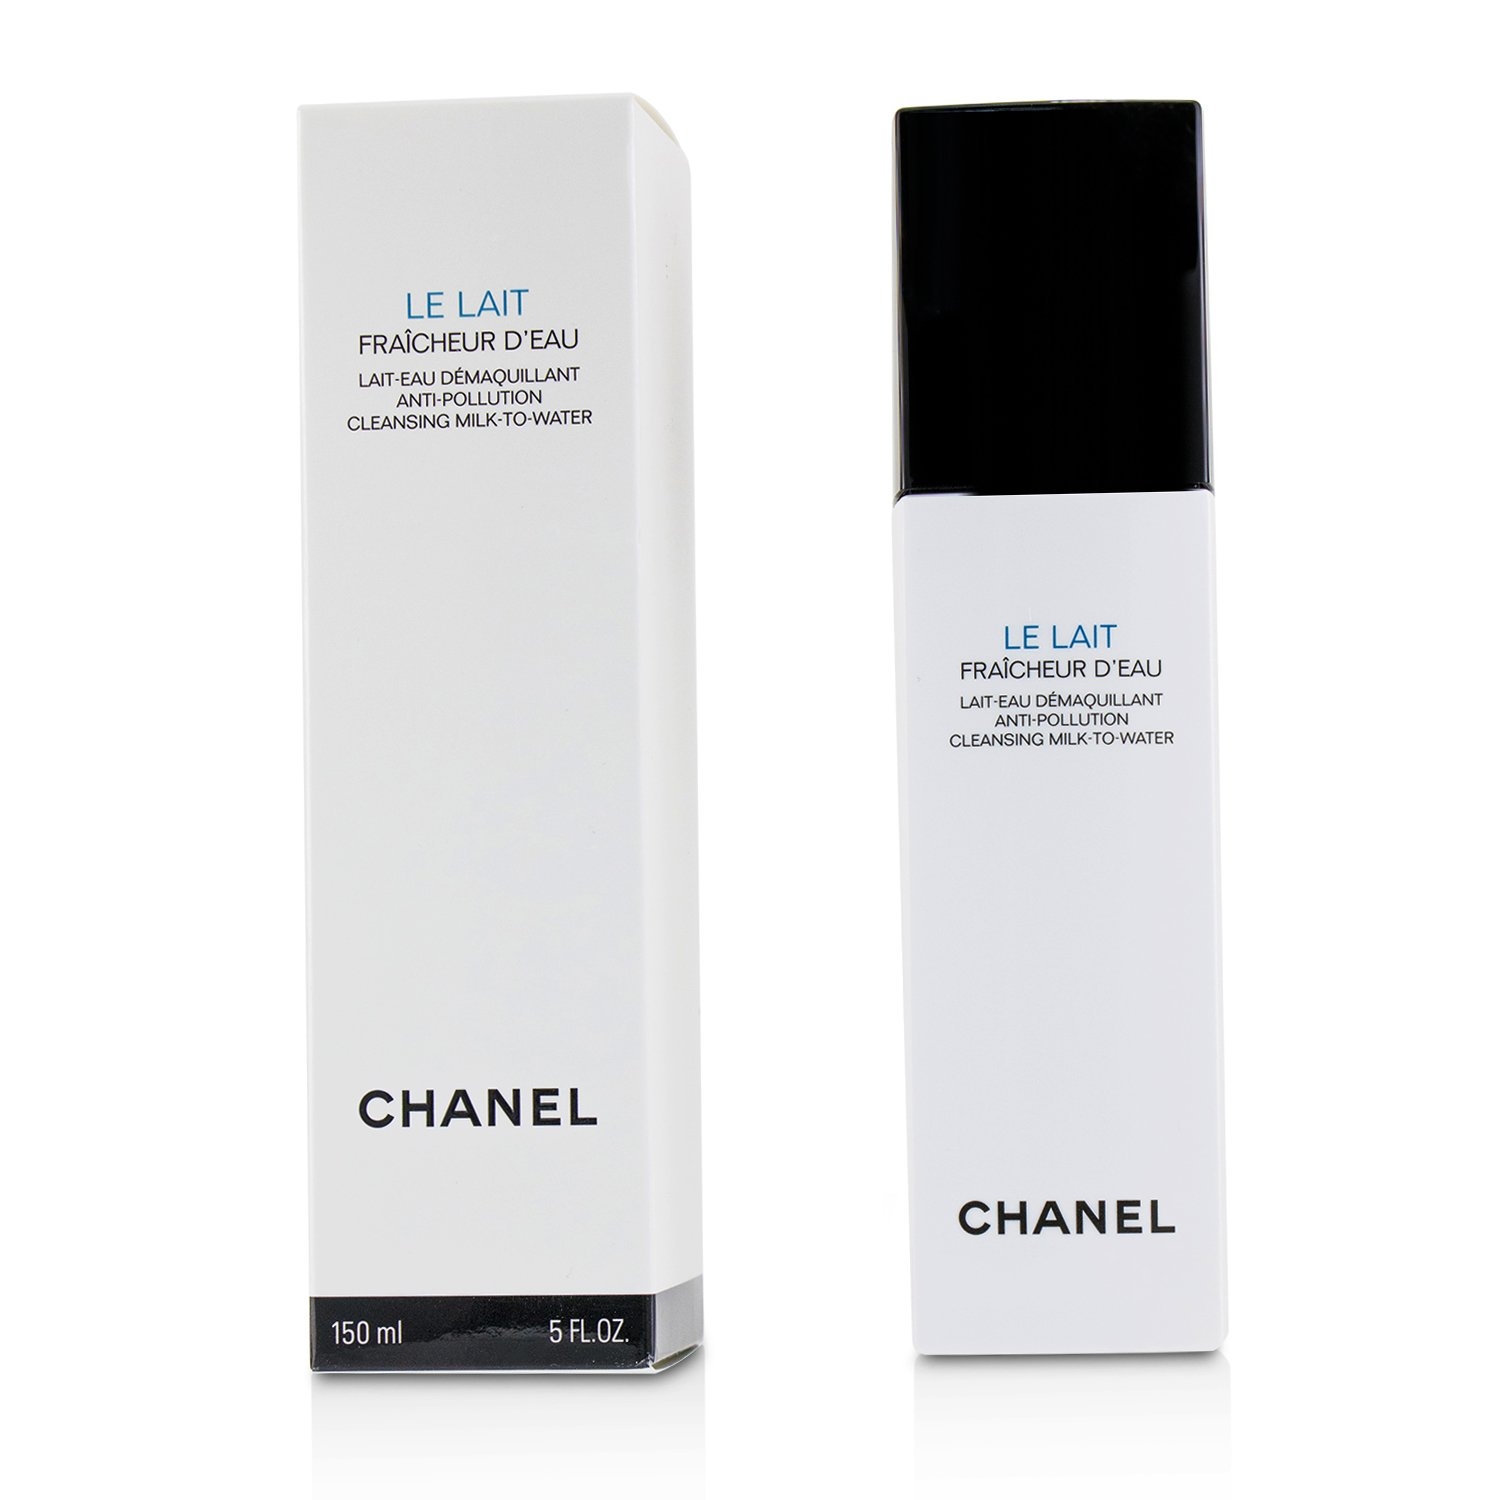 Chanel L'Huile Cleansing Oil Review - The Luxe Minimalist